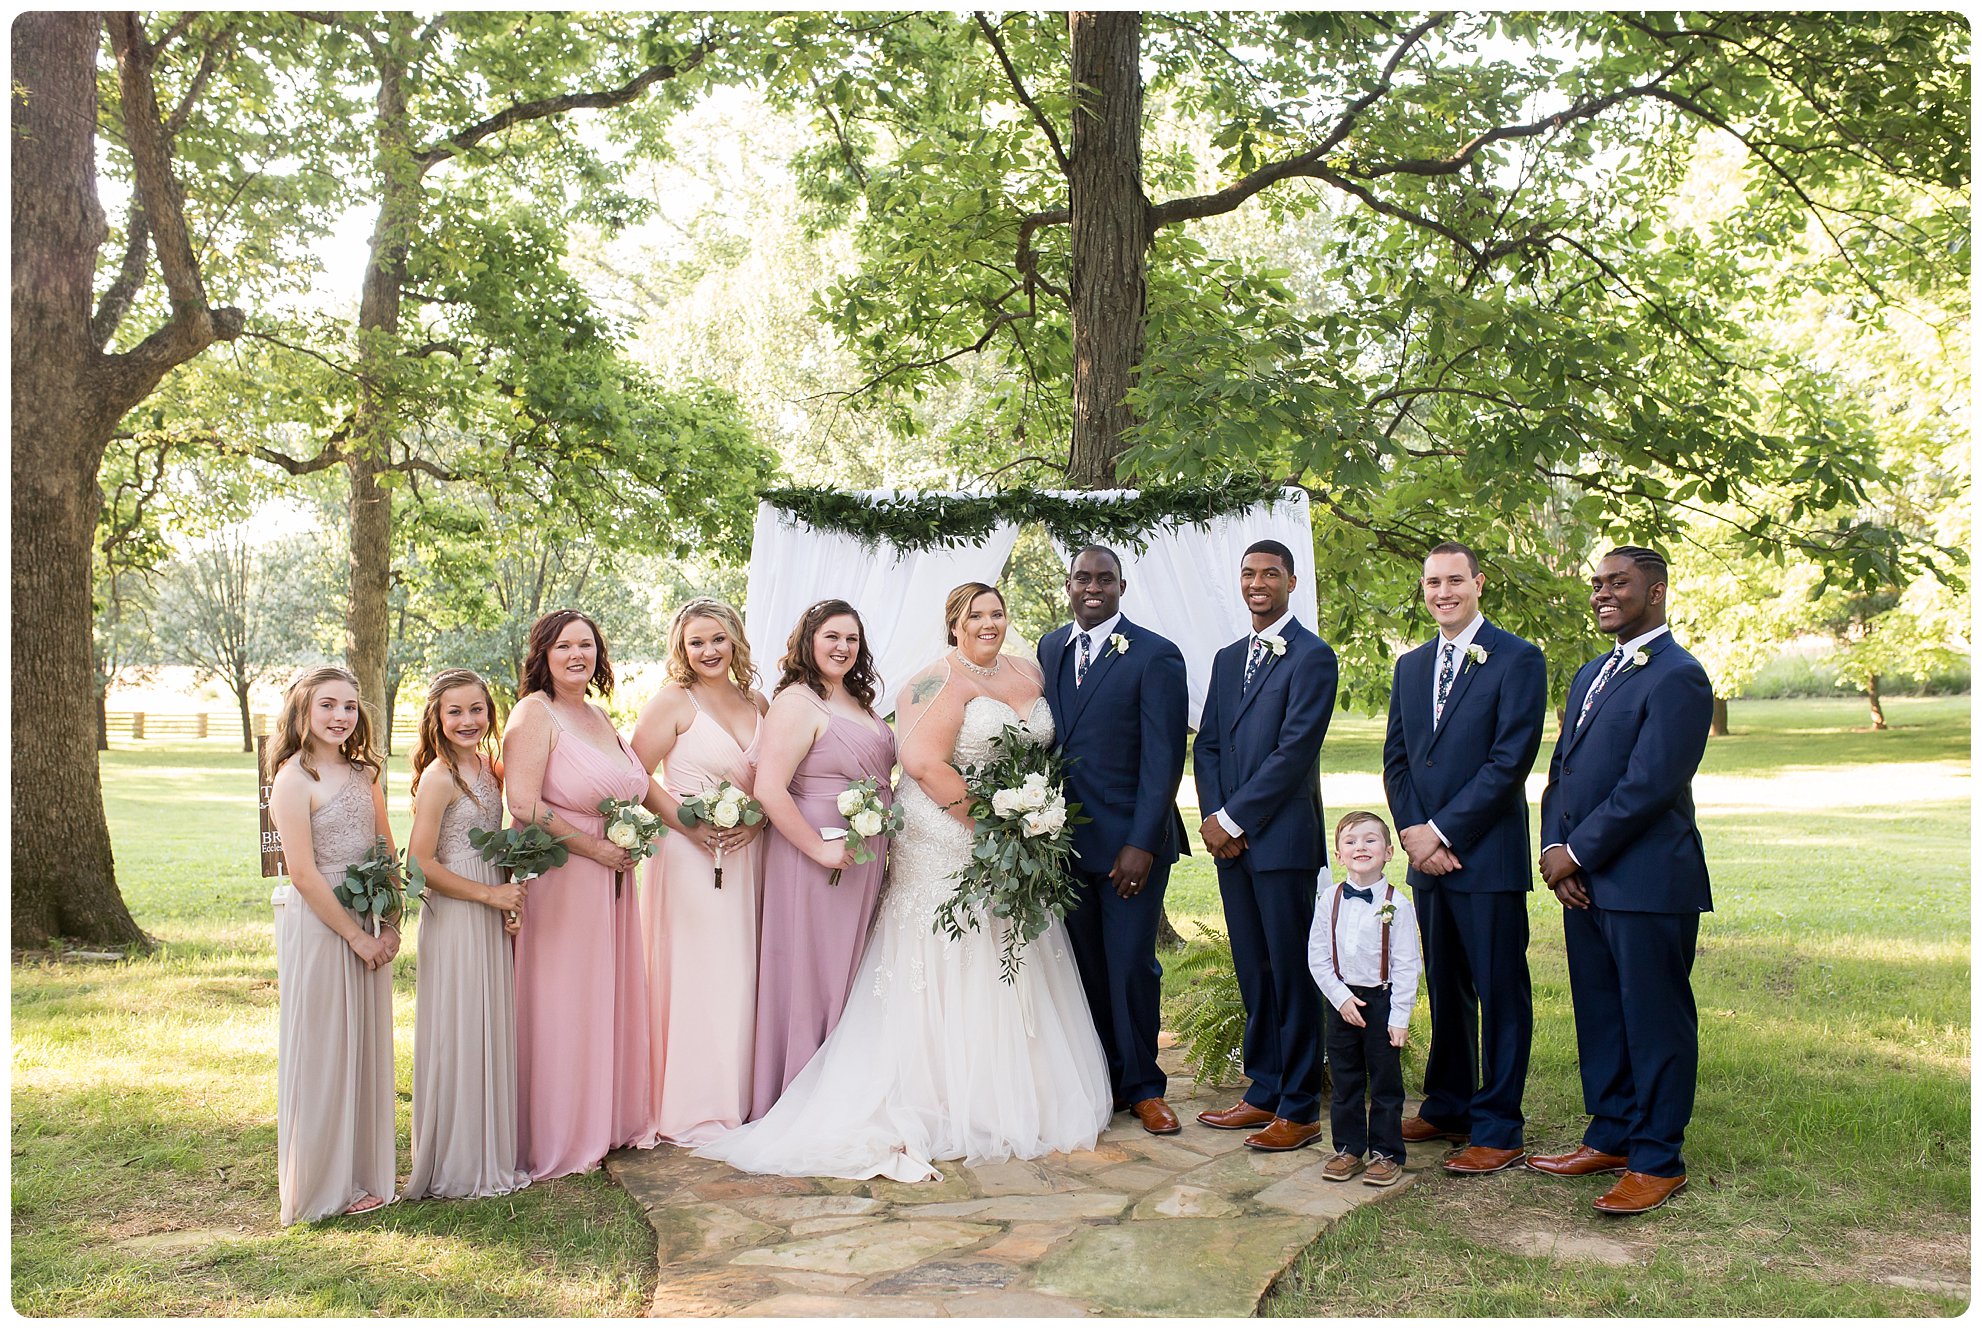 Nashville wedding at Iriswoods, Southern Belles and Blooms, navy tuxedo, whimsical garden wedding, southern wedding, southern bride, nashville bride, melanie grady photography, the best nashville wedding photographer, interracial couple wedding, mt juliet, 